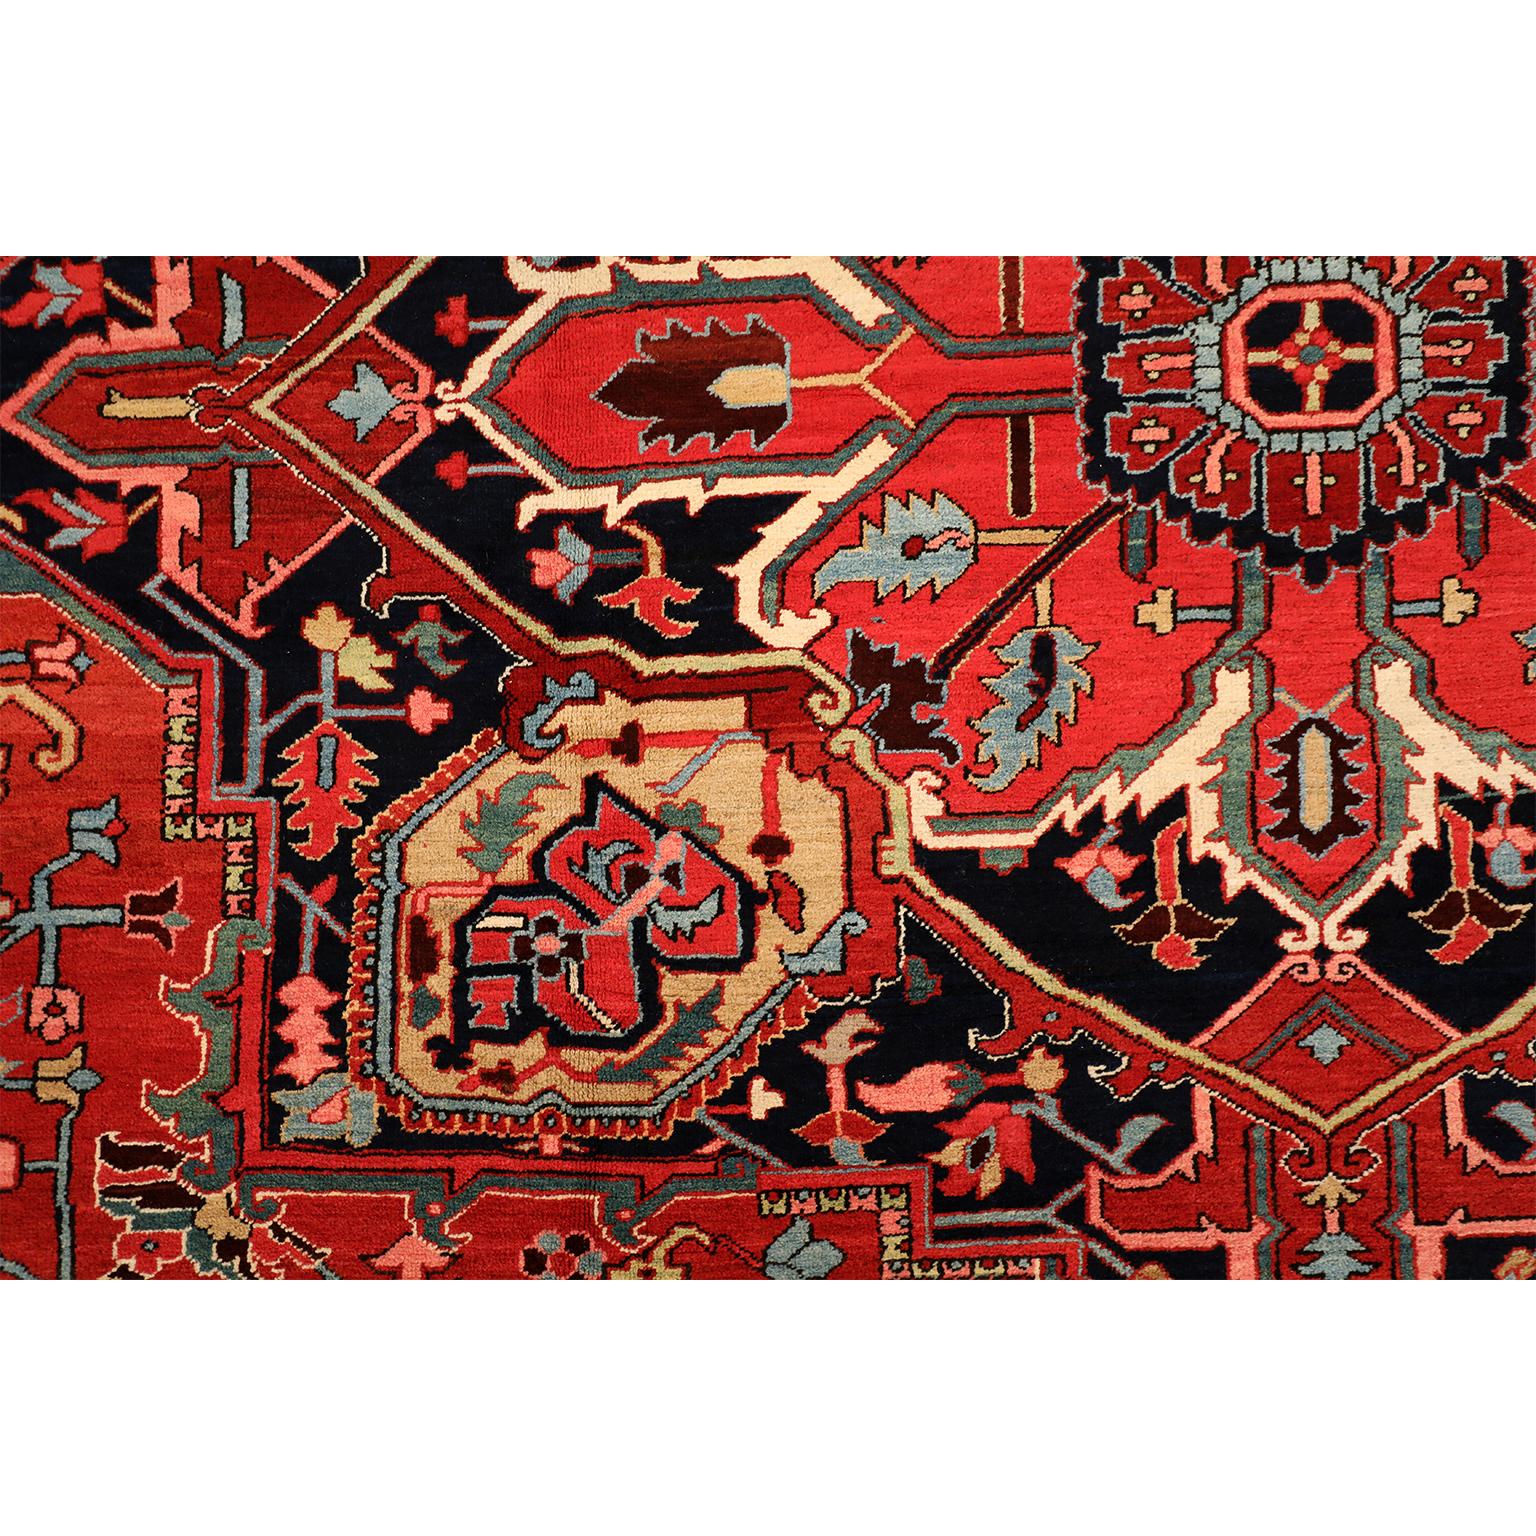 This antique Heriz Persian carpet circa 1910 in pure wool and vegetable dyes consists of a hand-knotted pile using a Persian knot upon a cotton warp and weft. The carpet features a stylized floral geometric medallion with an intricate border and